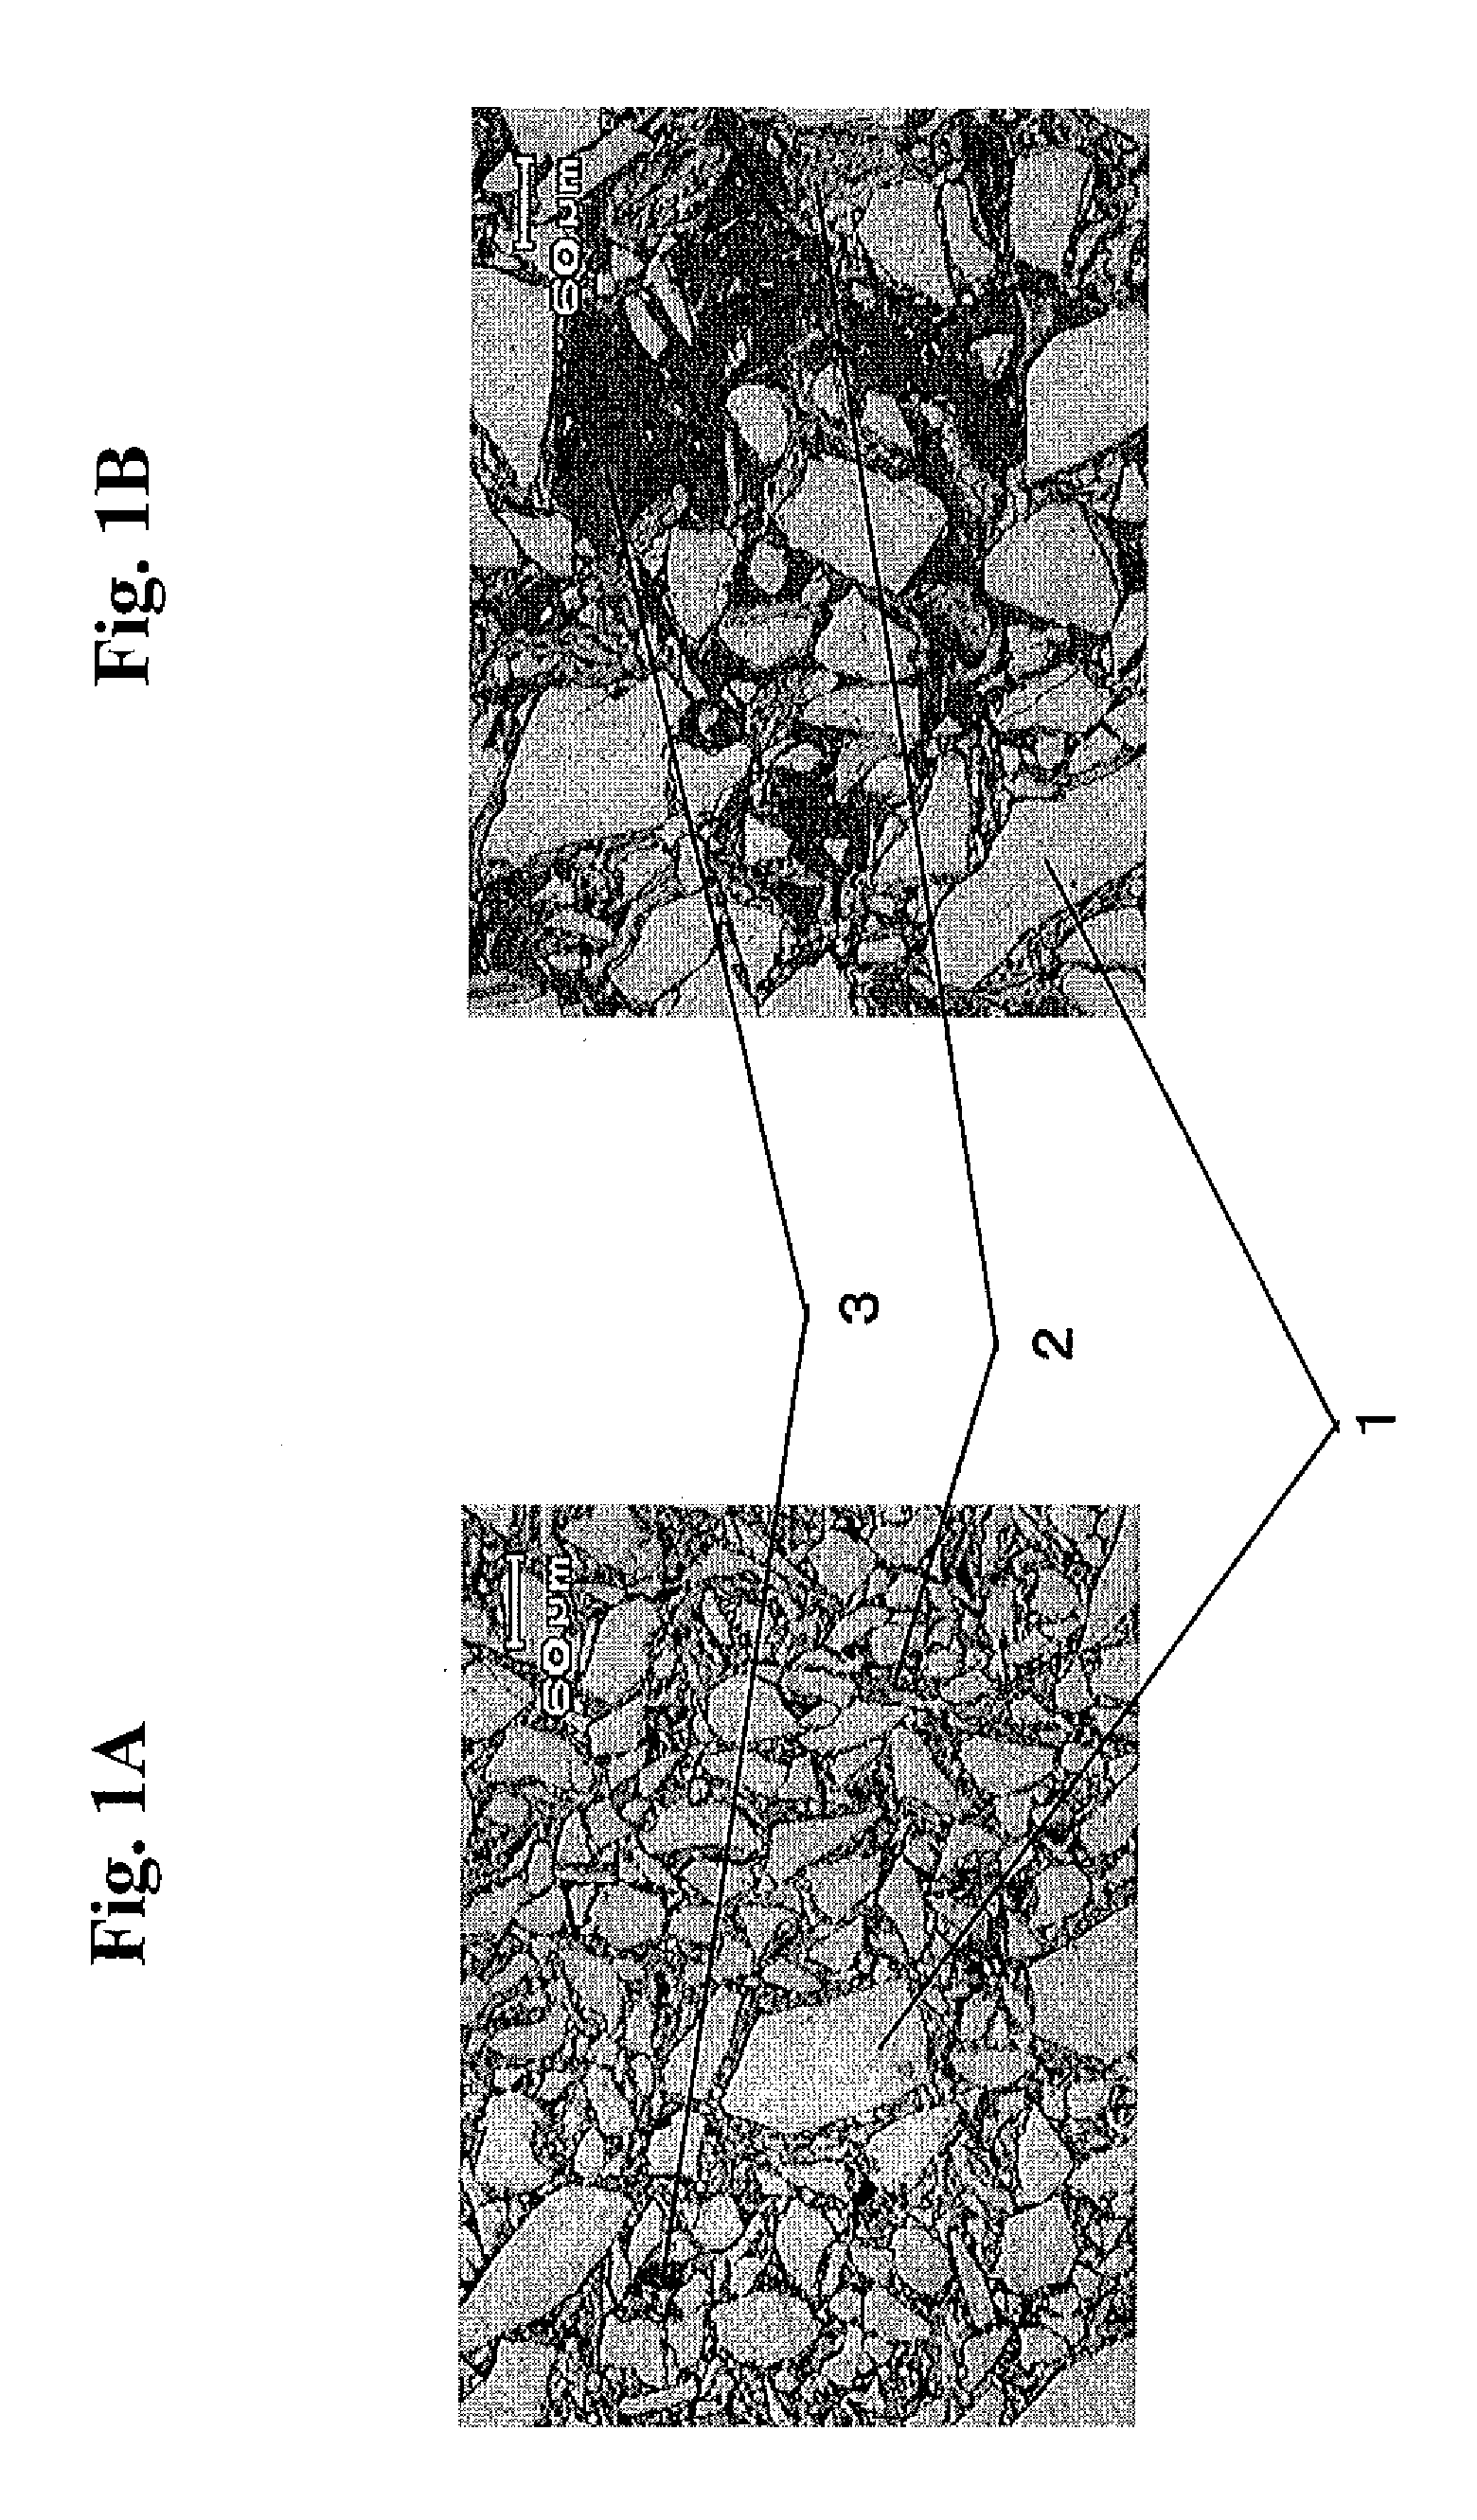 Zirconia-carbon-containing refractory and method for producing same